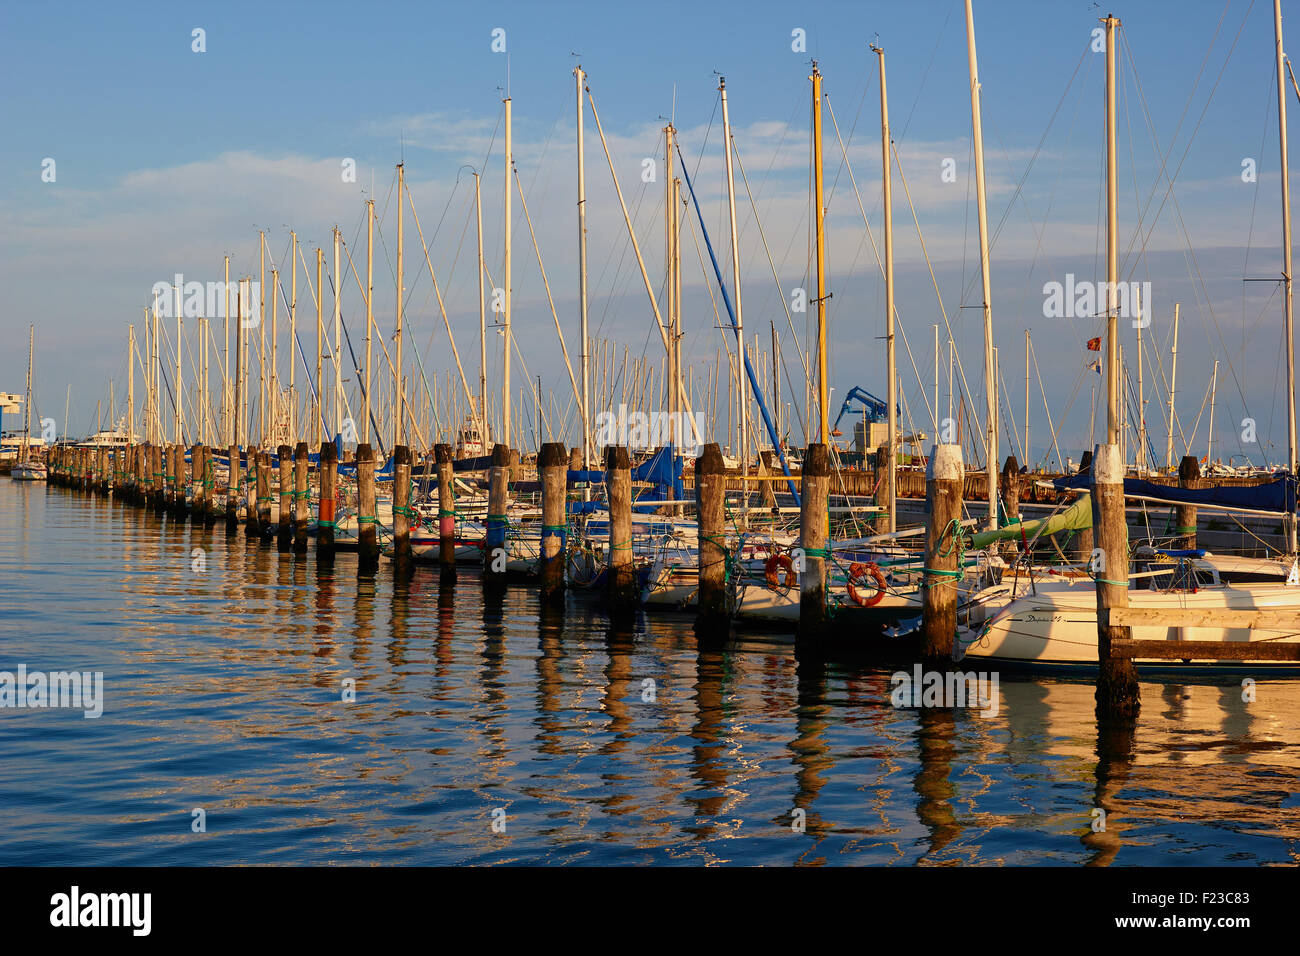 Line of yachts moored in the harbour at Chioggia Venetian Lagoon Veneto Italy Europe Stock Photo